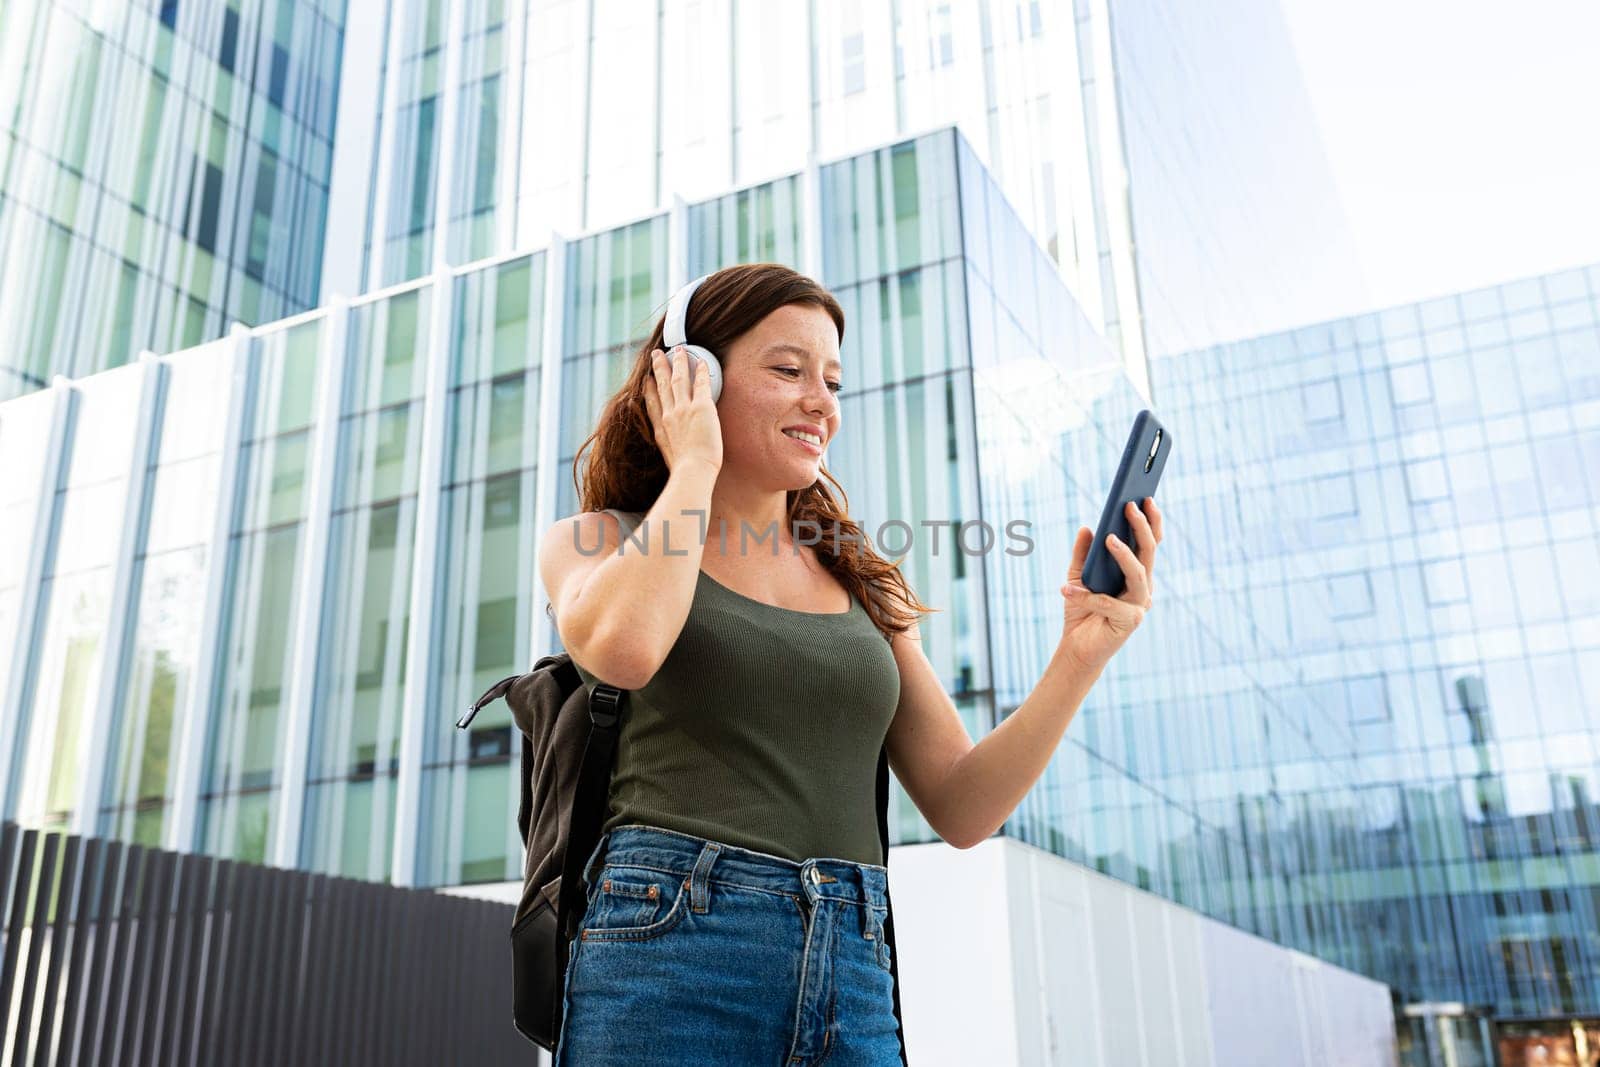 Redhead female university student with backpack listening to music using phone app and headphones standing outdoors in college campus. Copy space. Education and technology concepts.